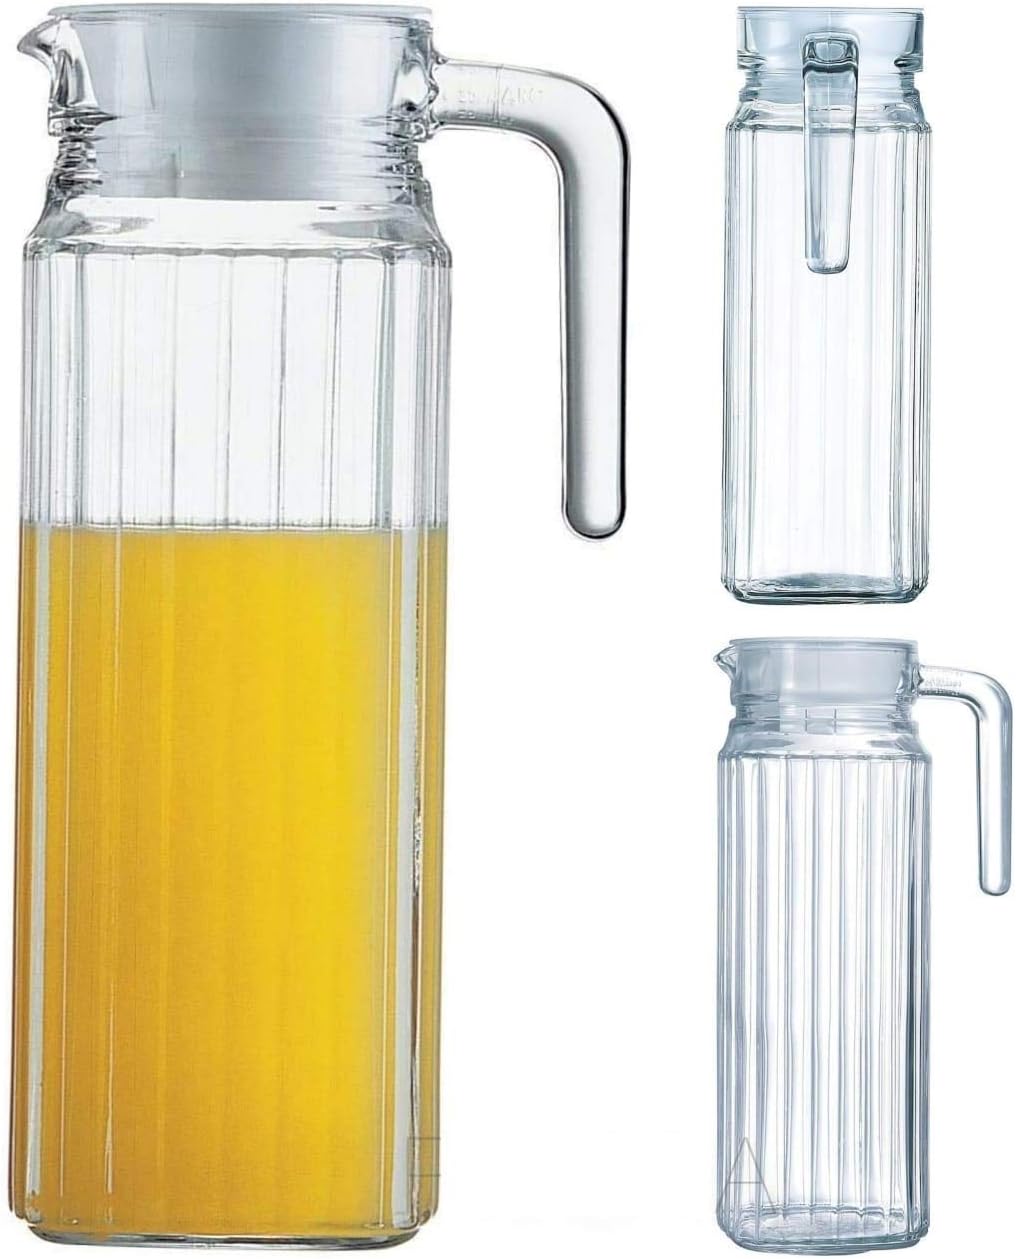 1.1L hot and cold water jug for iced tea, milk and juice